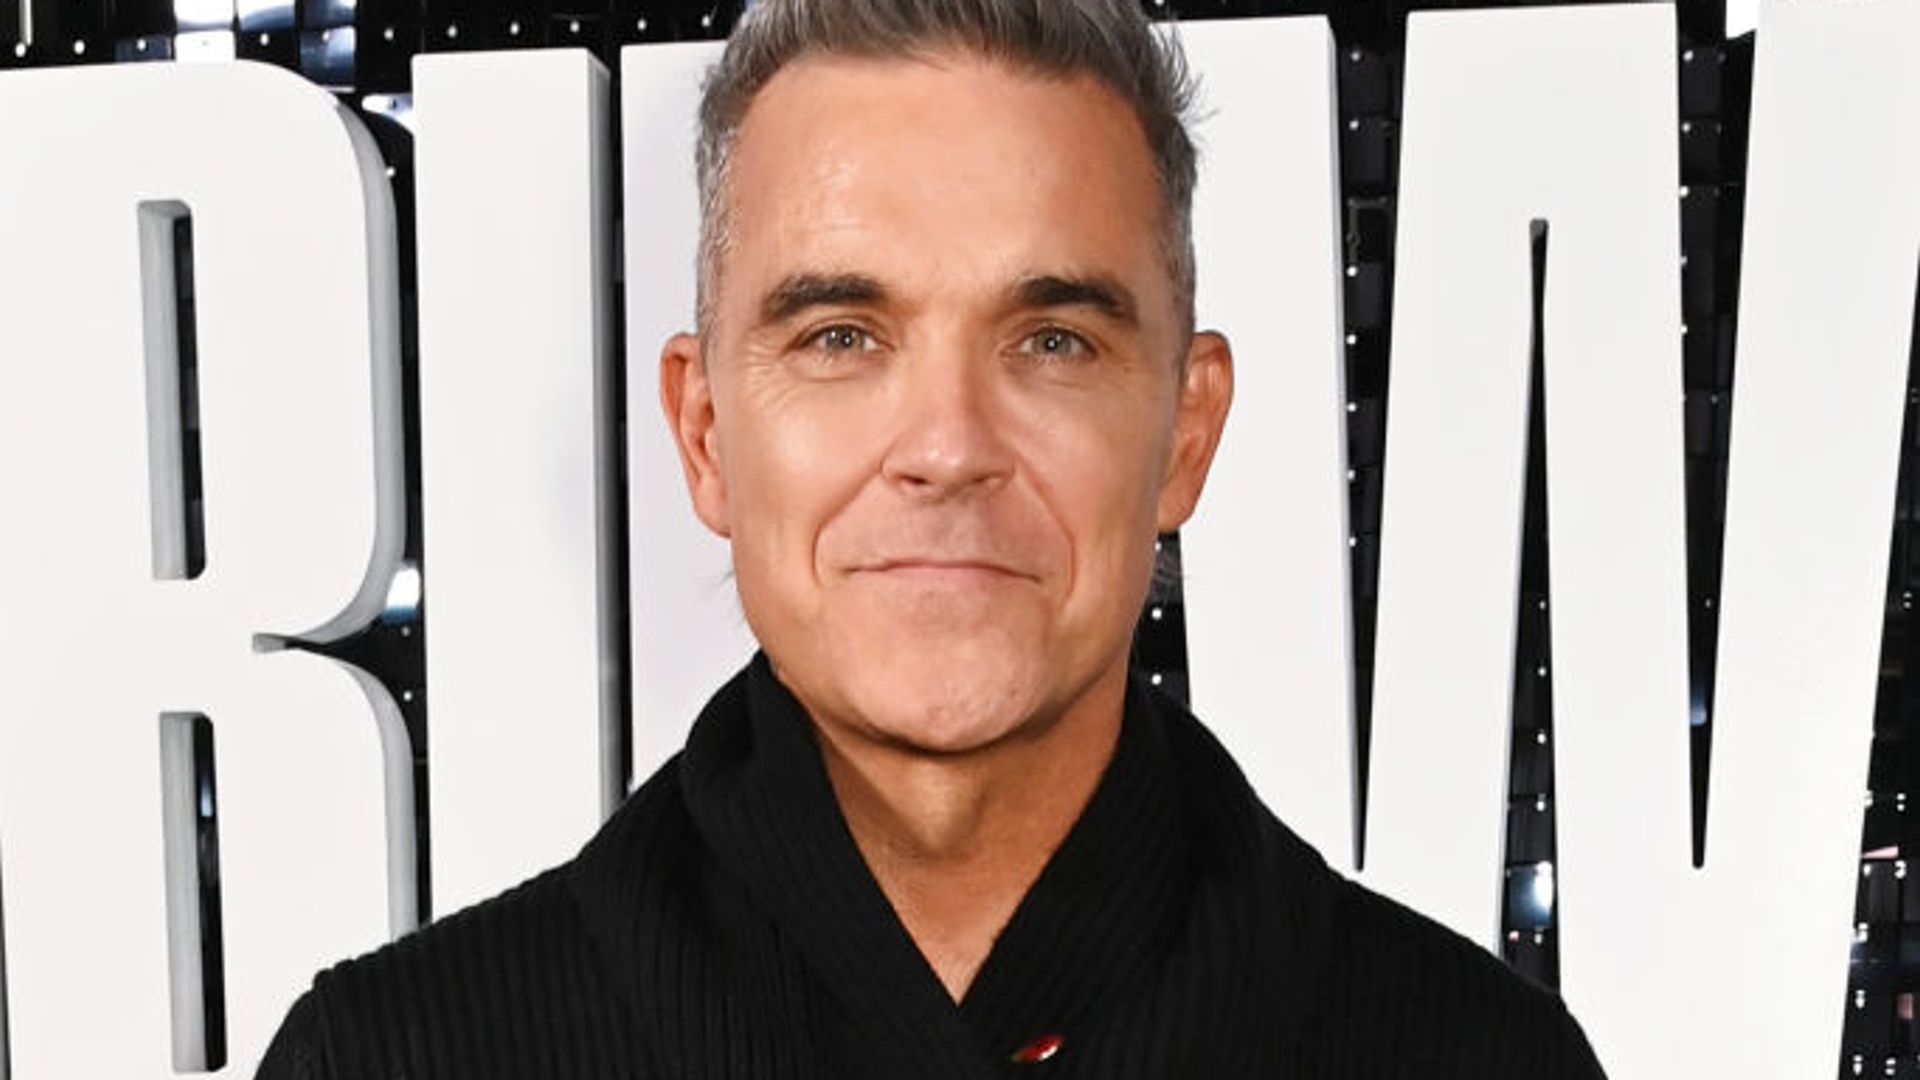 Robbie Williams will not be buying Port Vale Football Club